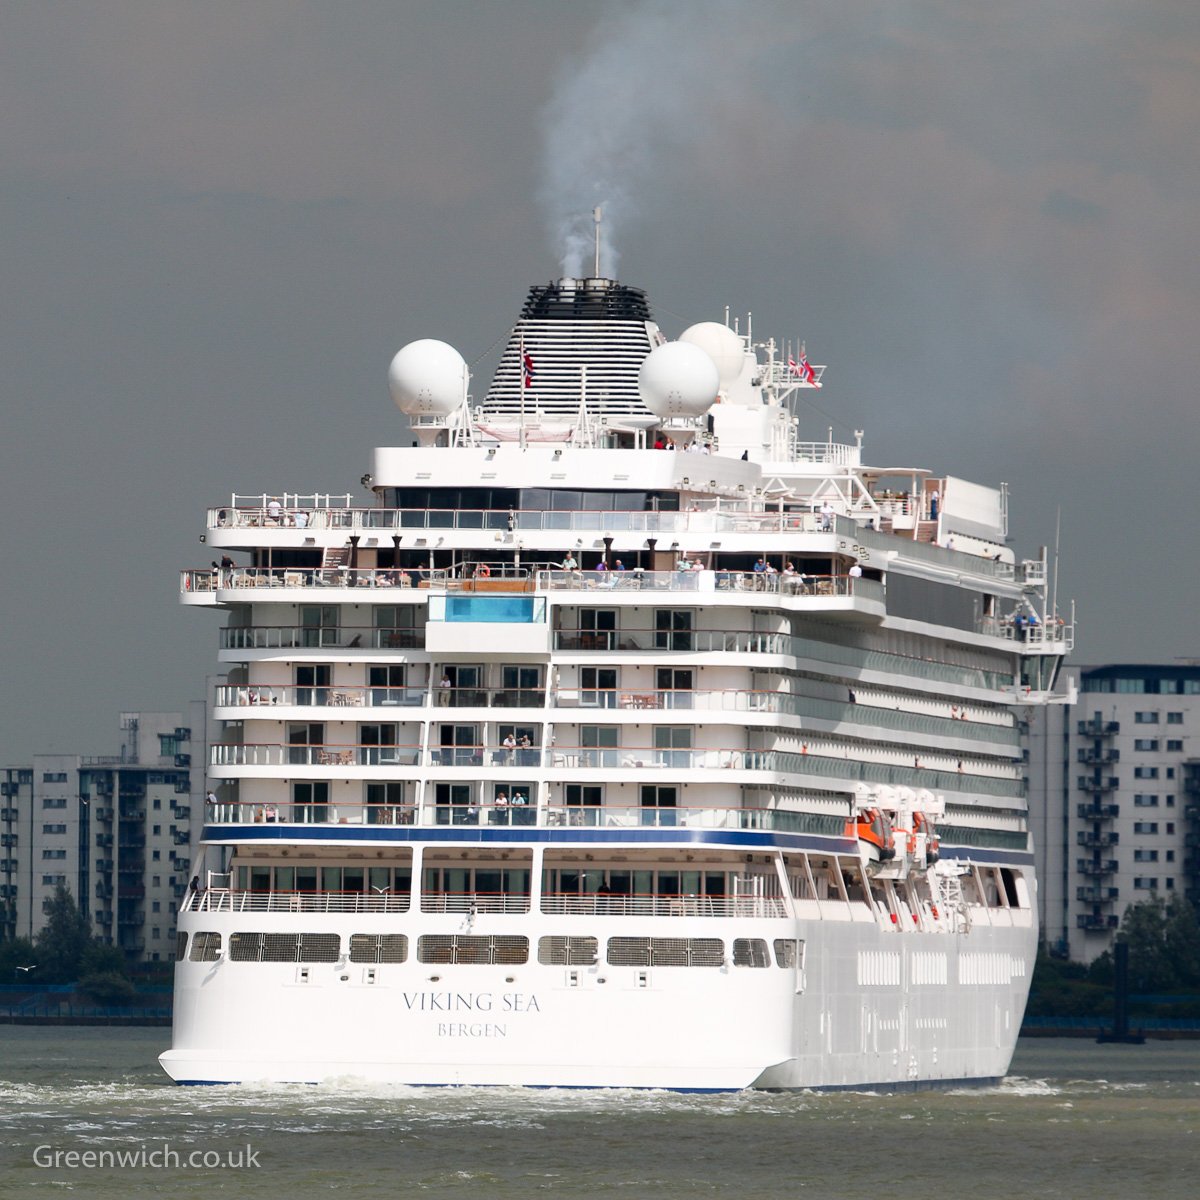 With 8 visits to Greenwich by 228-metre-long @VikingCruisesUK ships this summer, I asked them to respond to local concerns about emissions from their vessels.

'Viking will not be commenting on this at this time.'